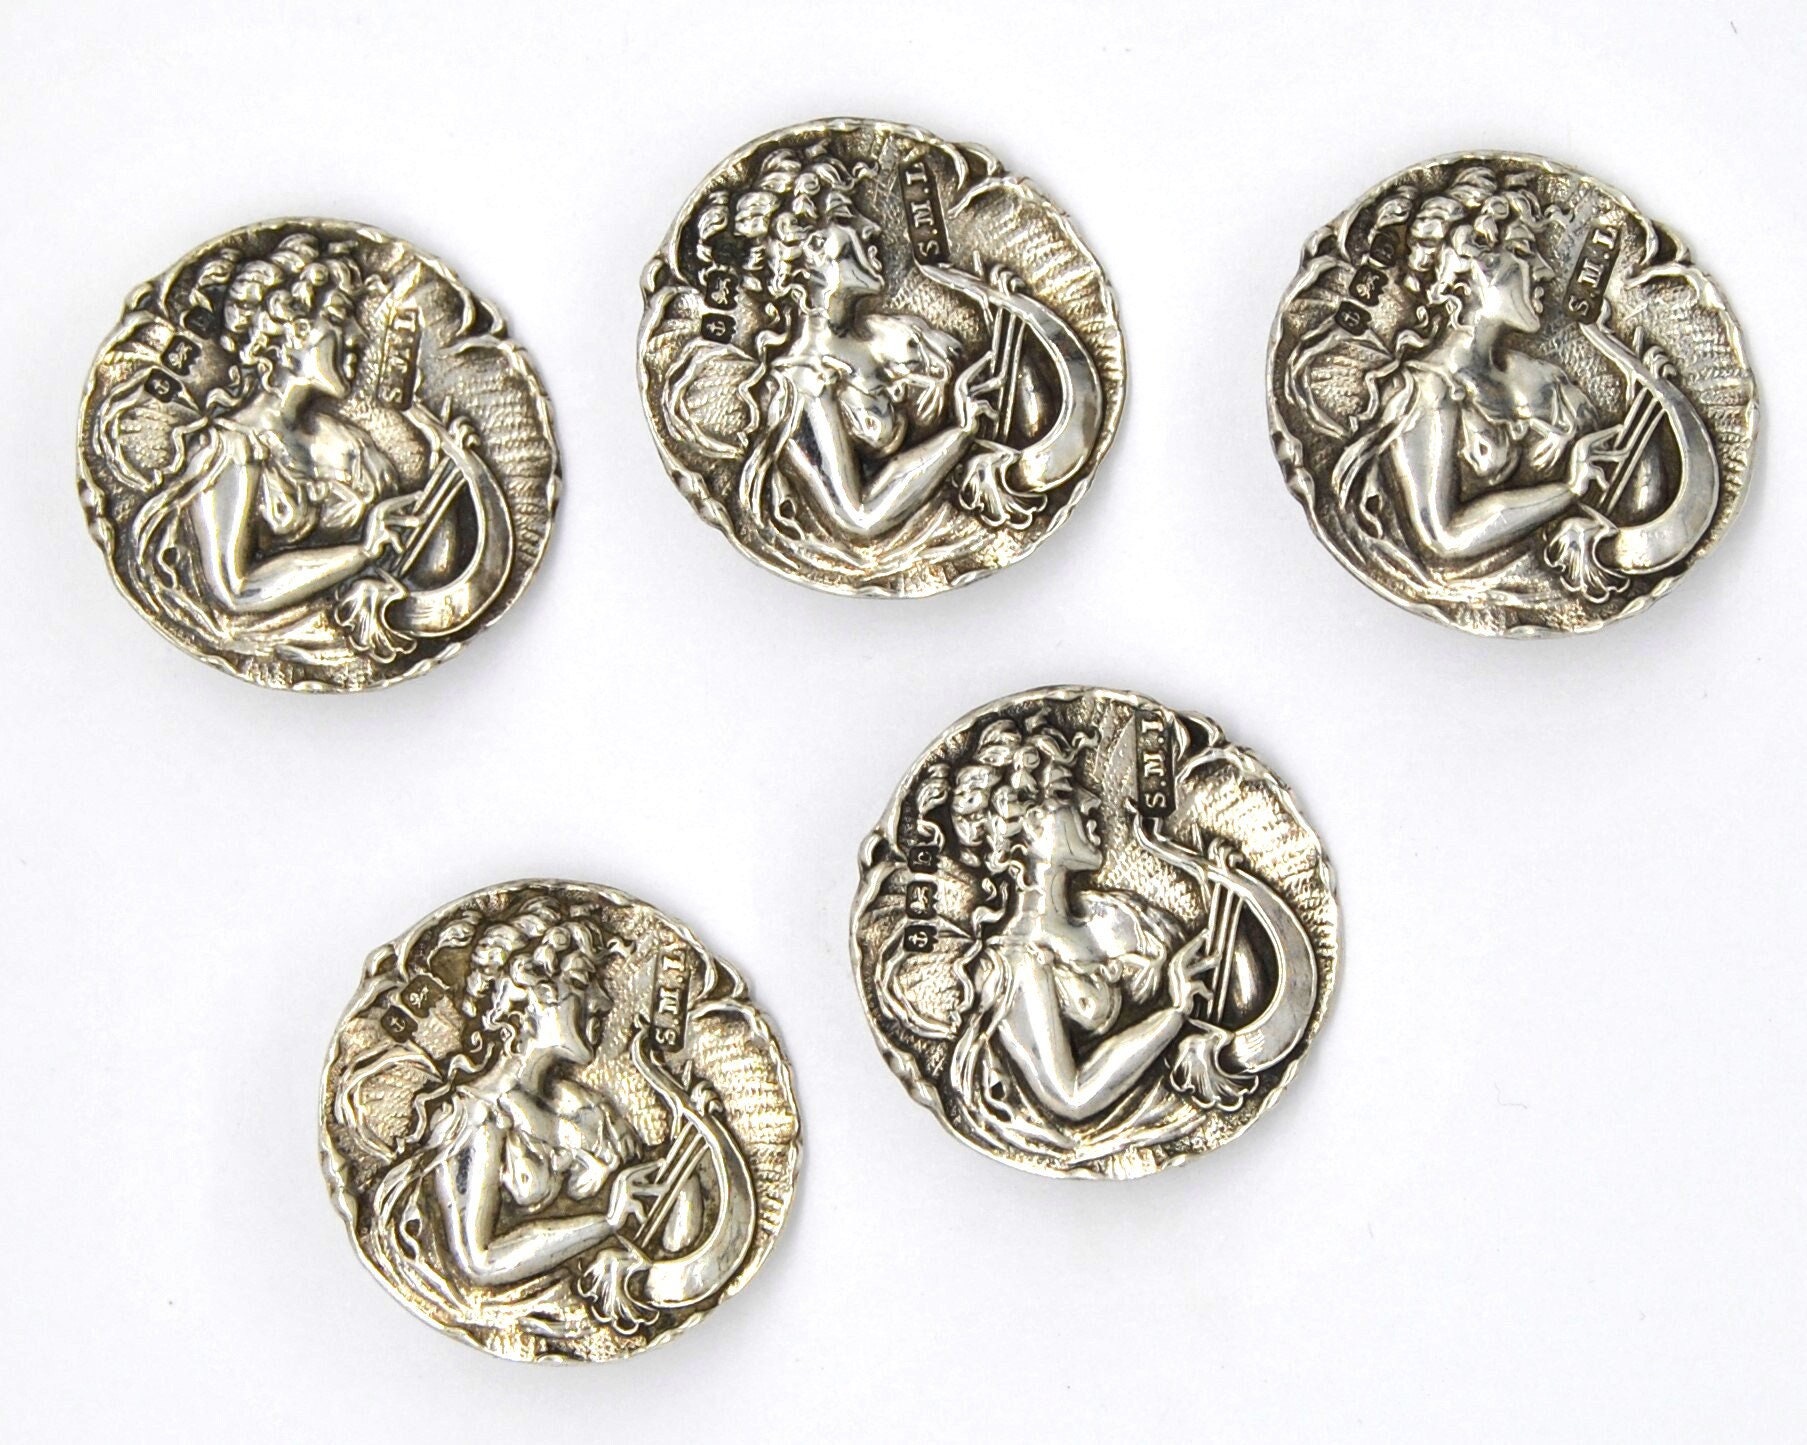 Antique sterling silver/silver plated buttons - price guide and values